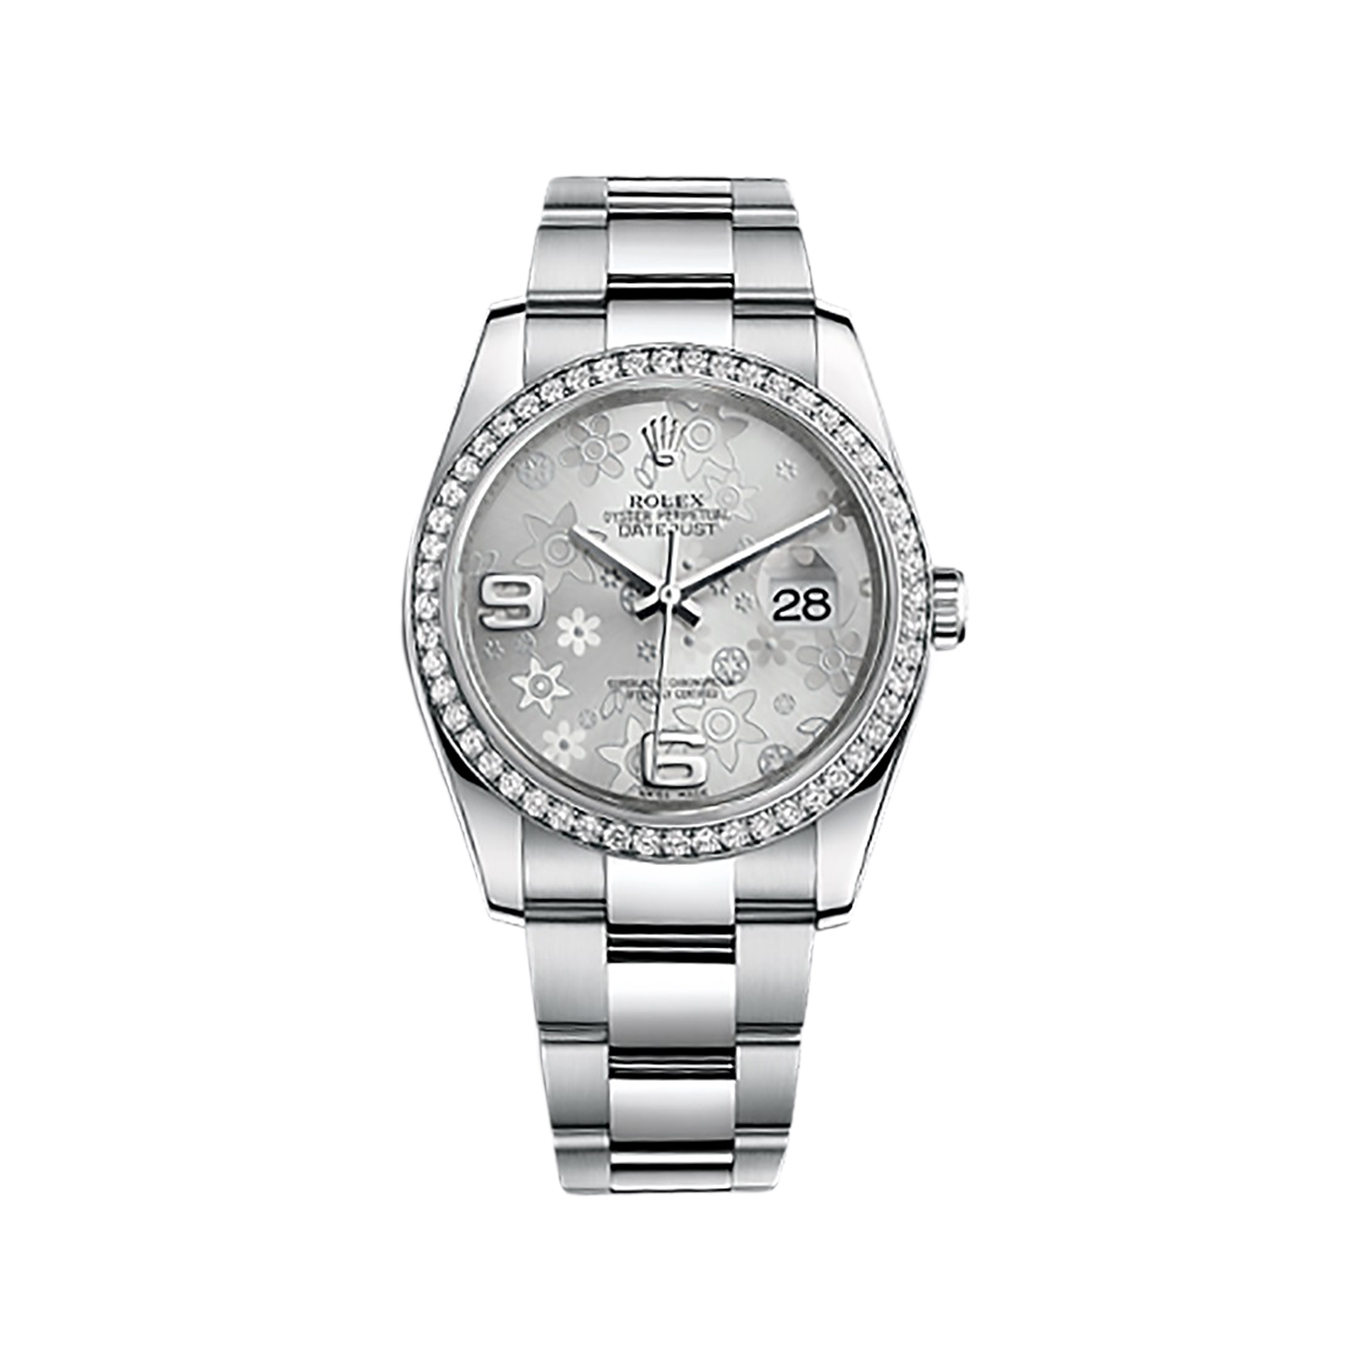 Datejust 36 116244 White Gold & Stainless Steel Watch (Silver Floral Motif)